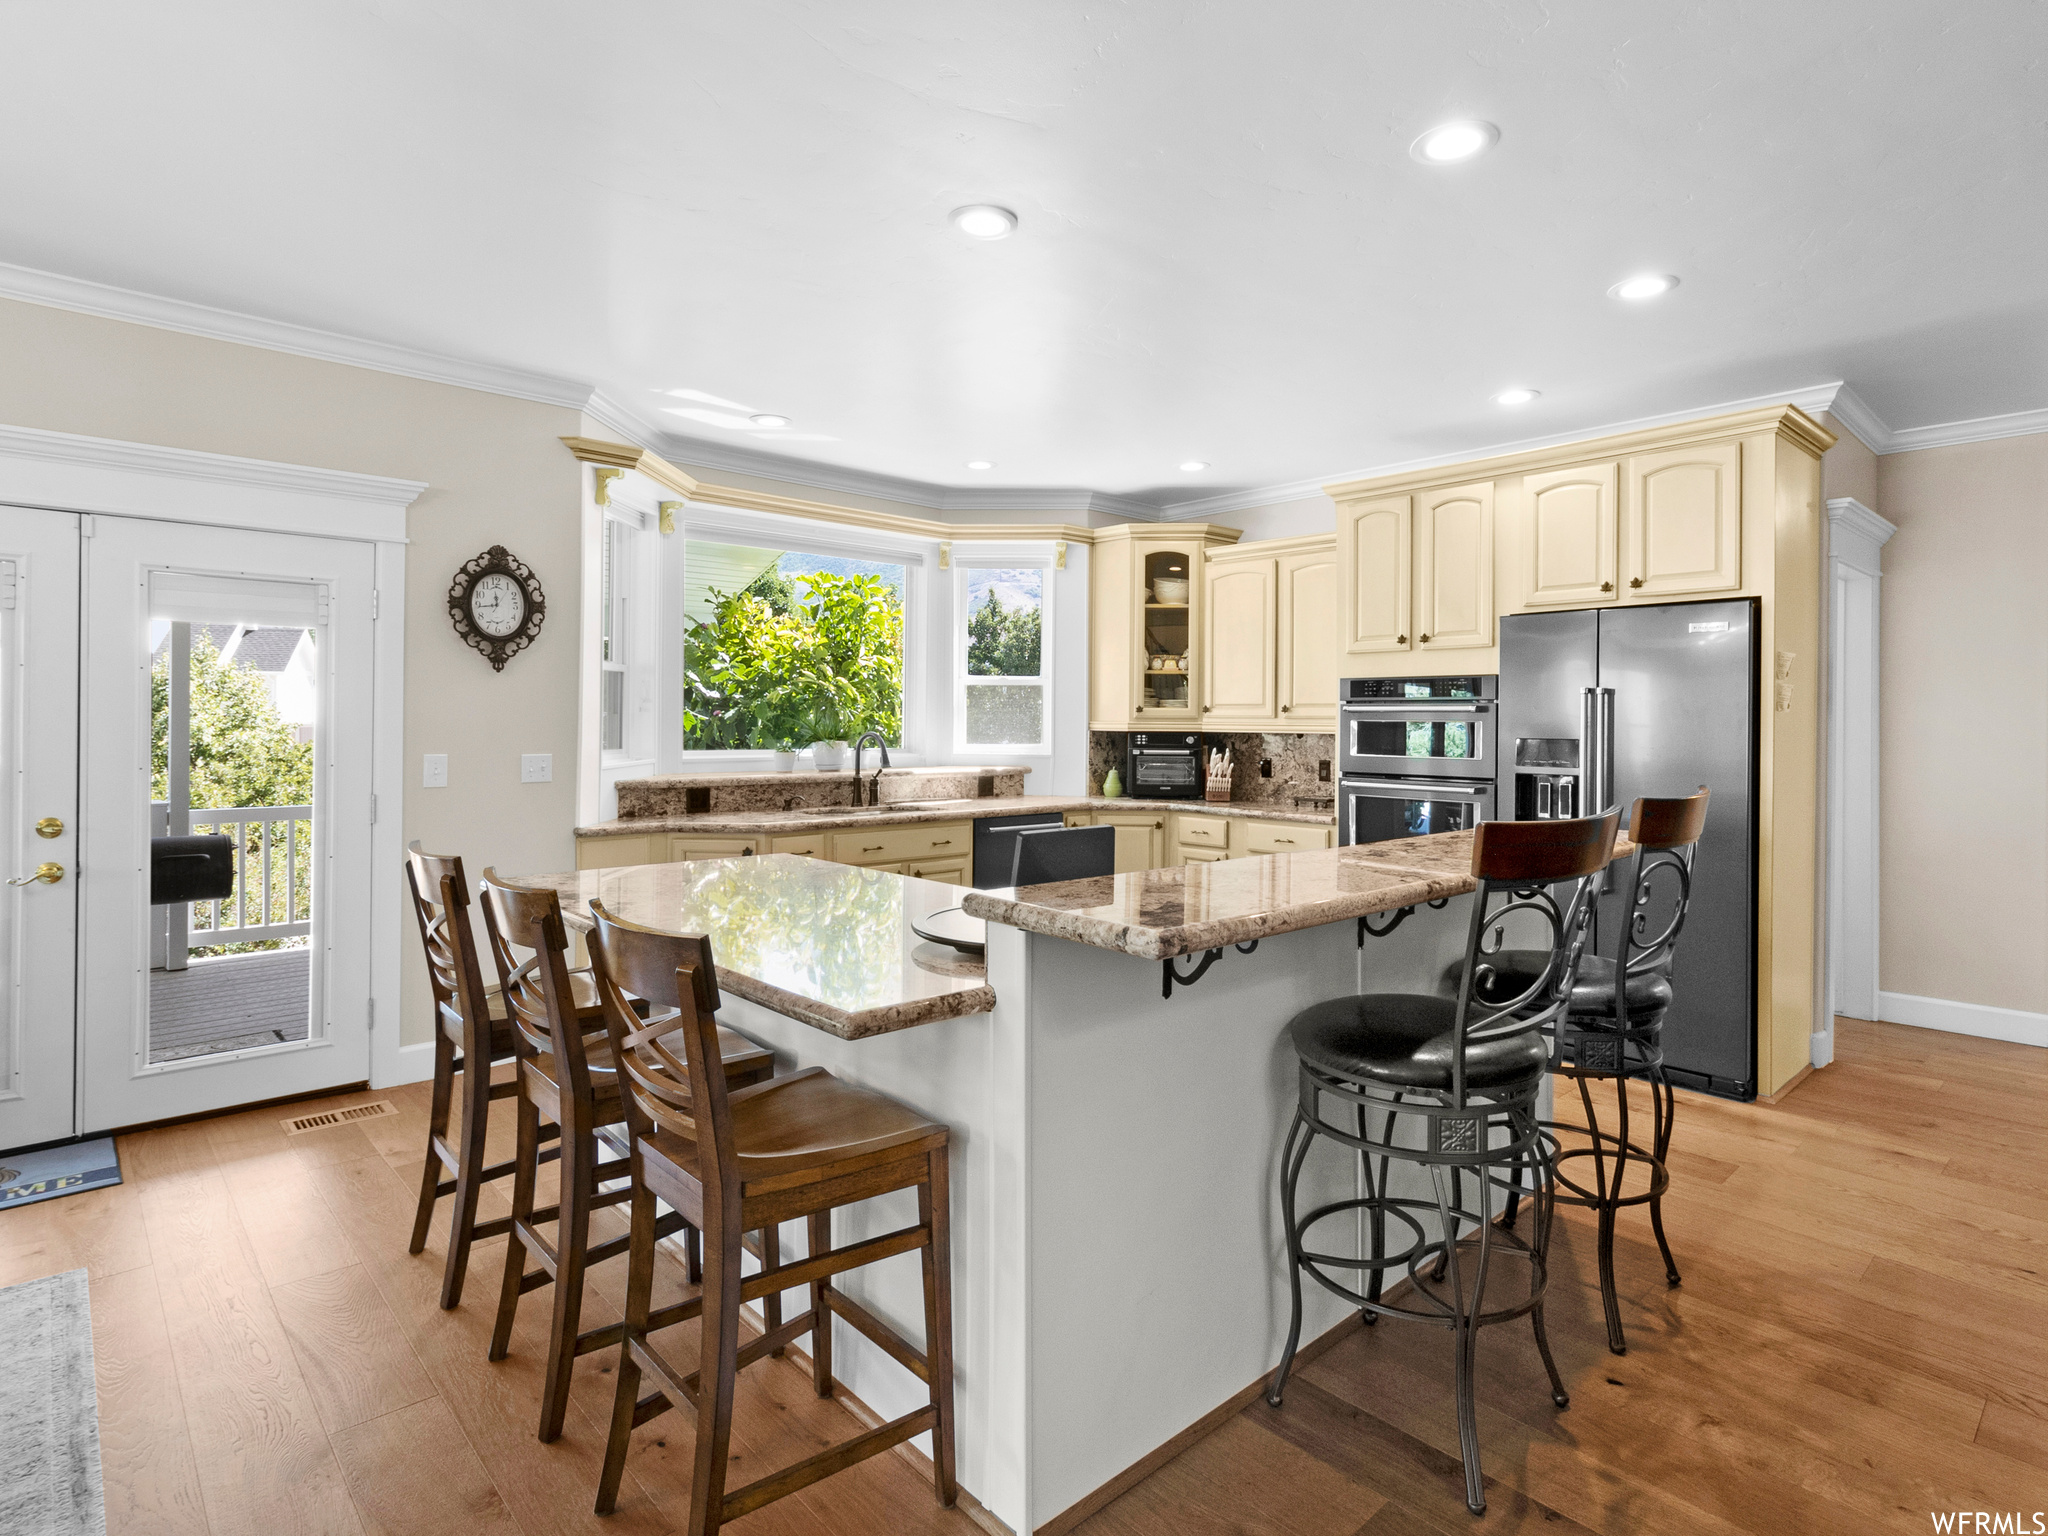 Kitchen featuring a wealth of natural light, ornamental molding, backsplash, appliances with stainless steel finishes, light hardwood flooring, and a center island